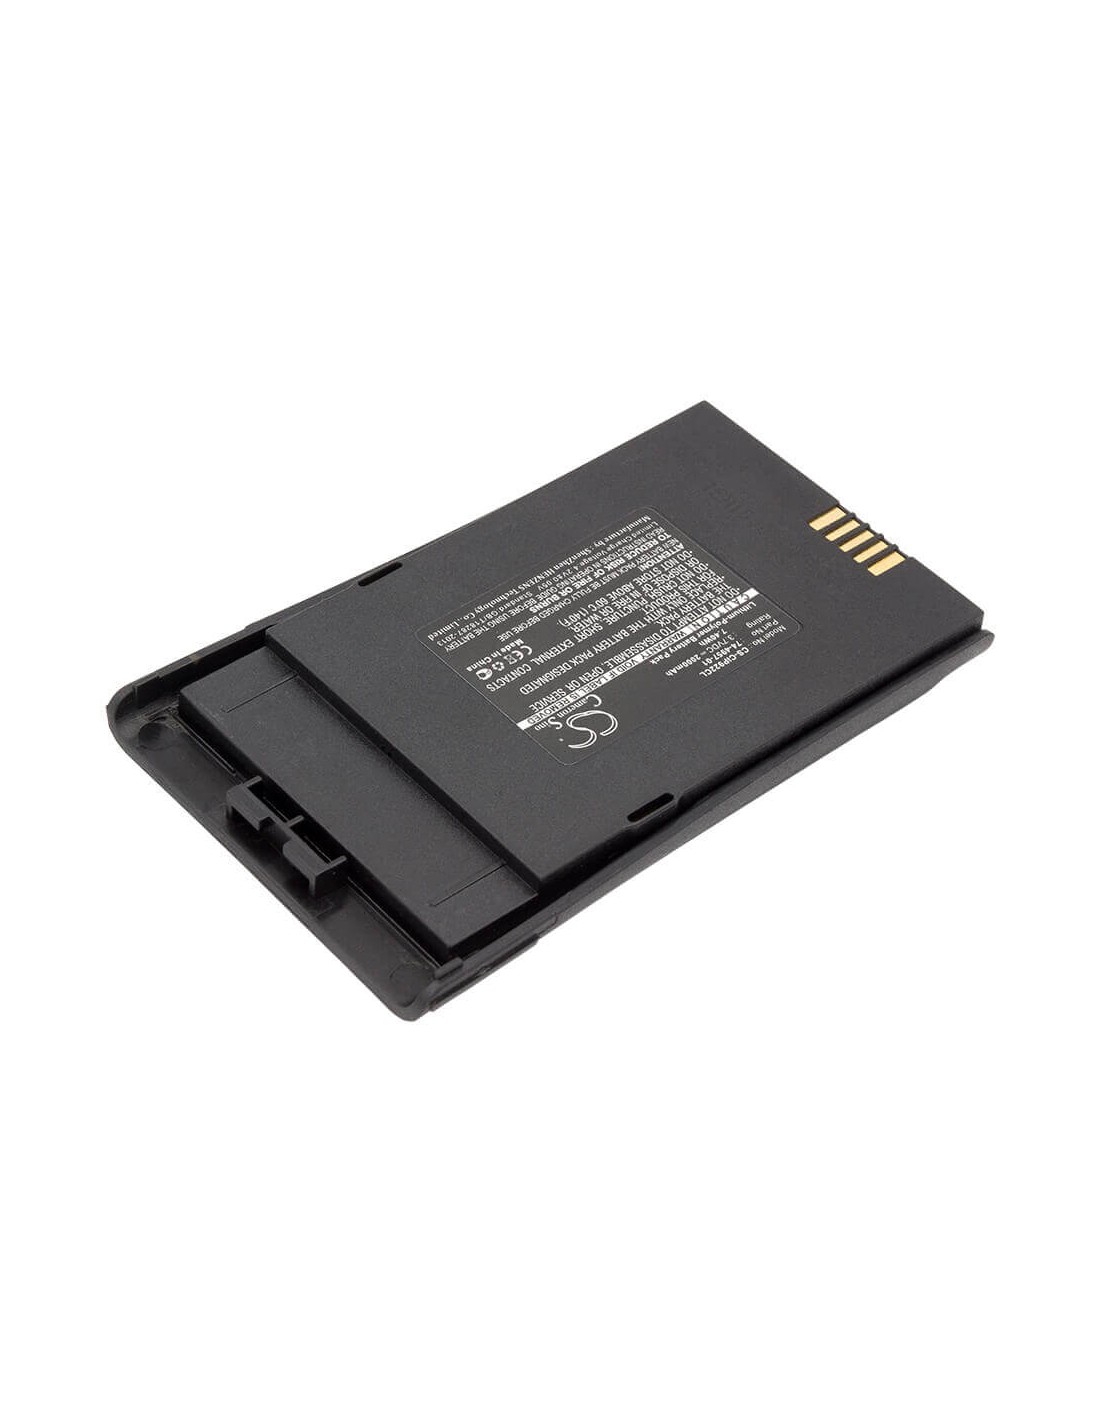 Battery for Cisco Cp-7921, Cp-7921g, Cp-7921g Unified 3.7V, 2500mAh - 9.25Wh